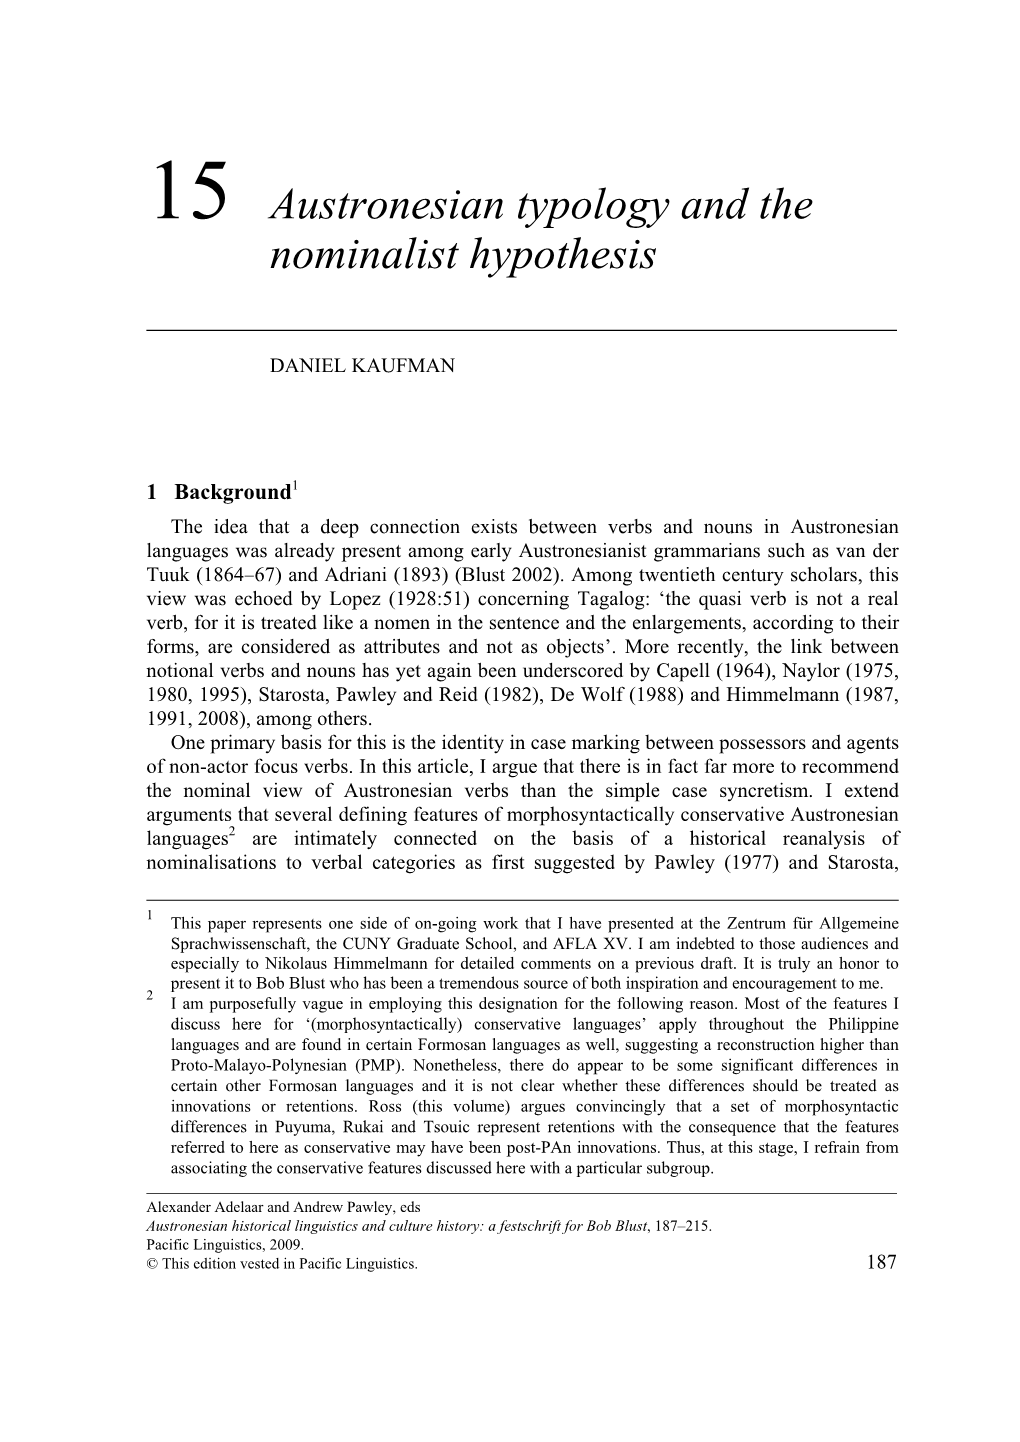 15 Austronesian Typology and the Nominalist Hypothesis